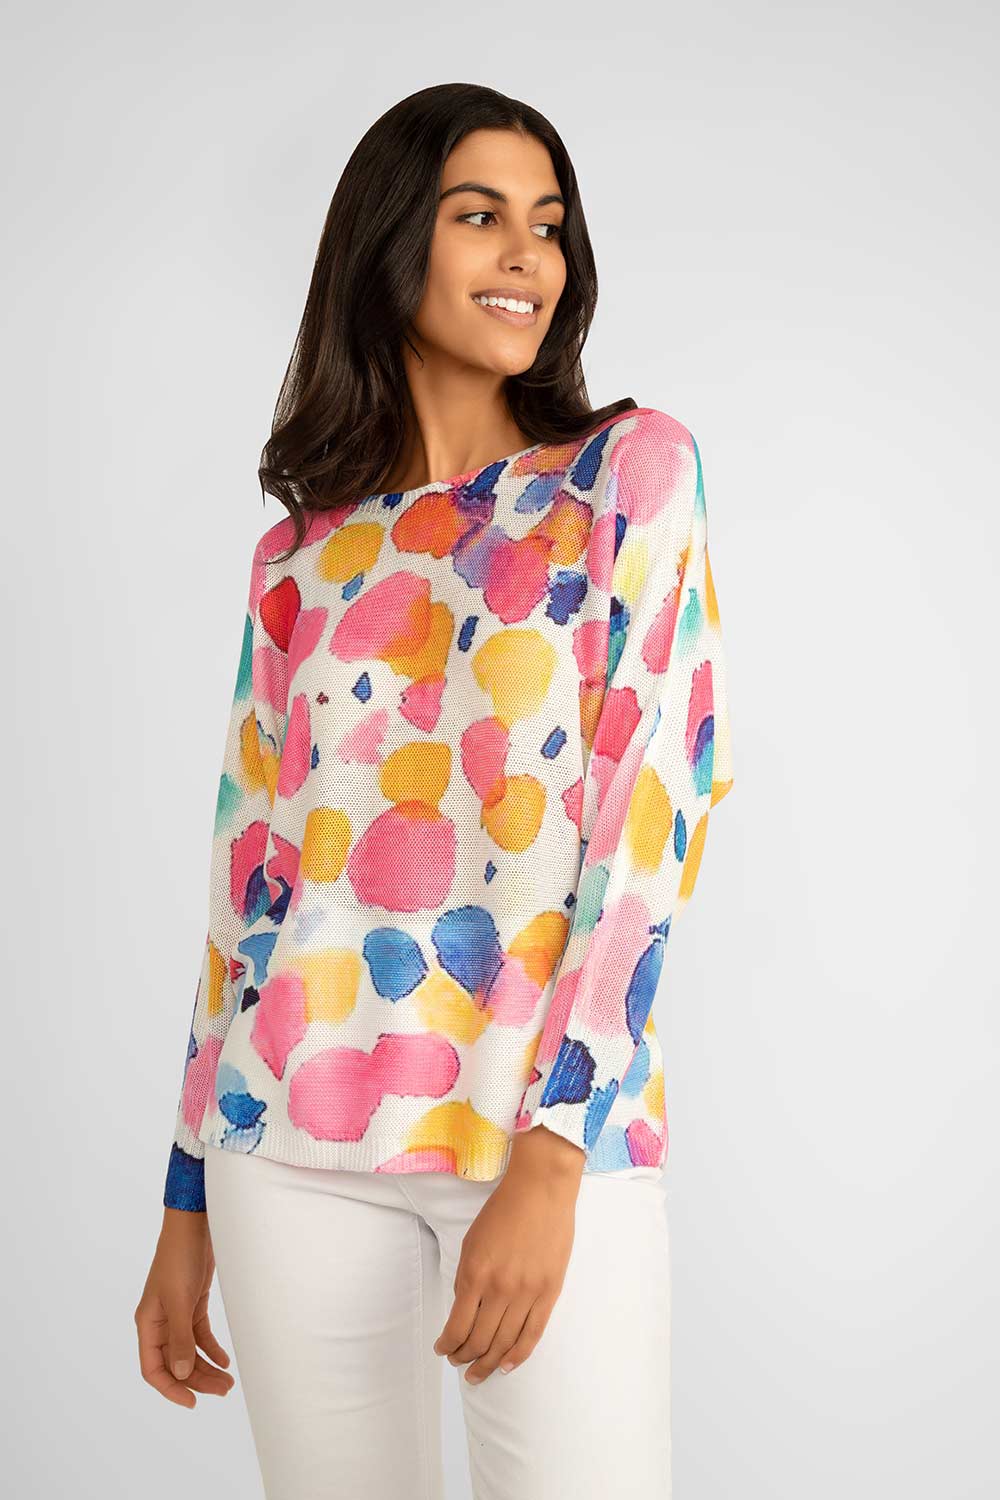 Carre Noir (6802) Women's Long Sleeve Printed Dot Lightweight Pullover Sweater in a pink dot print accented by blues and yellows